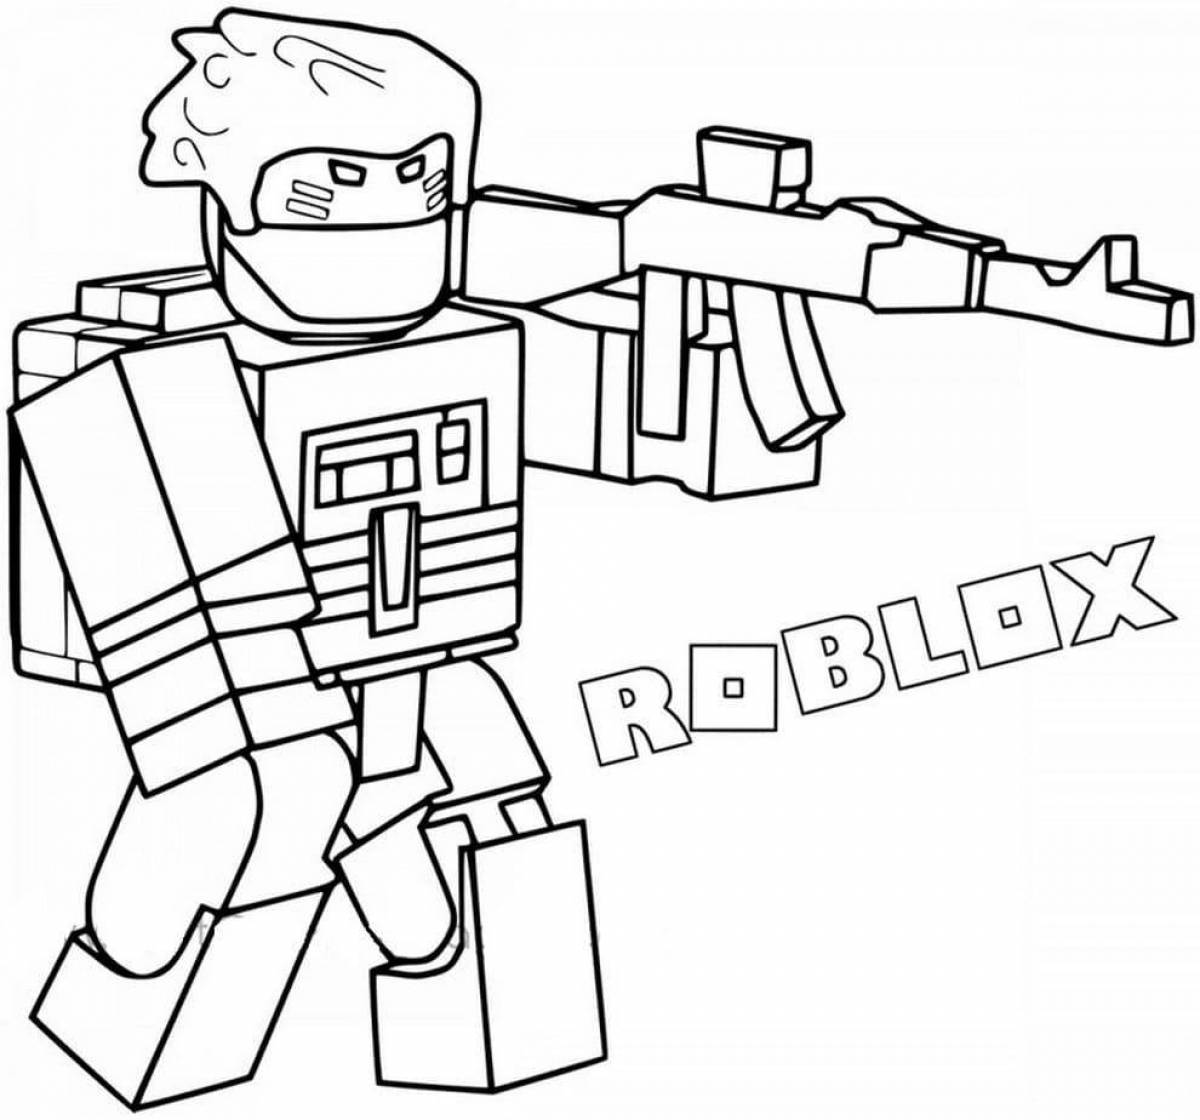 Cute roblox kp coloring page